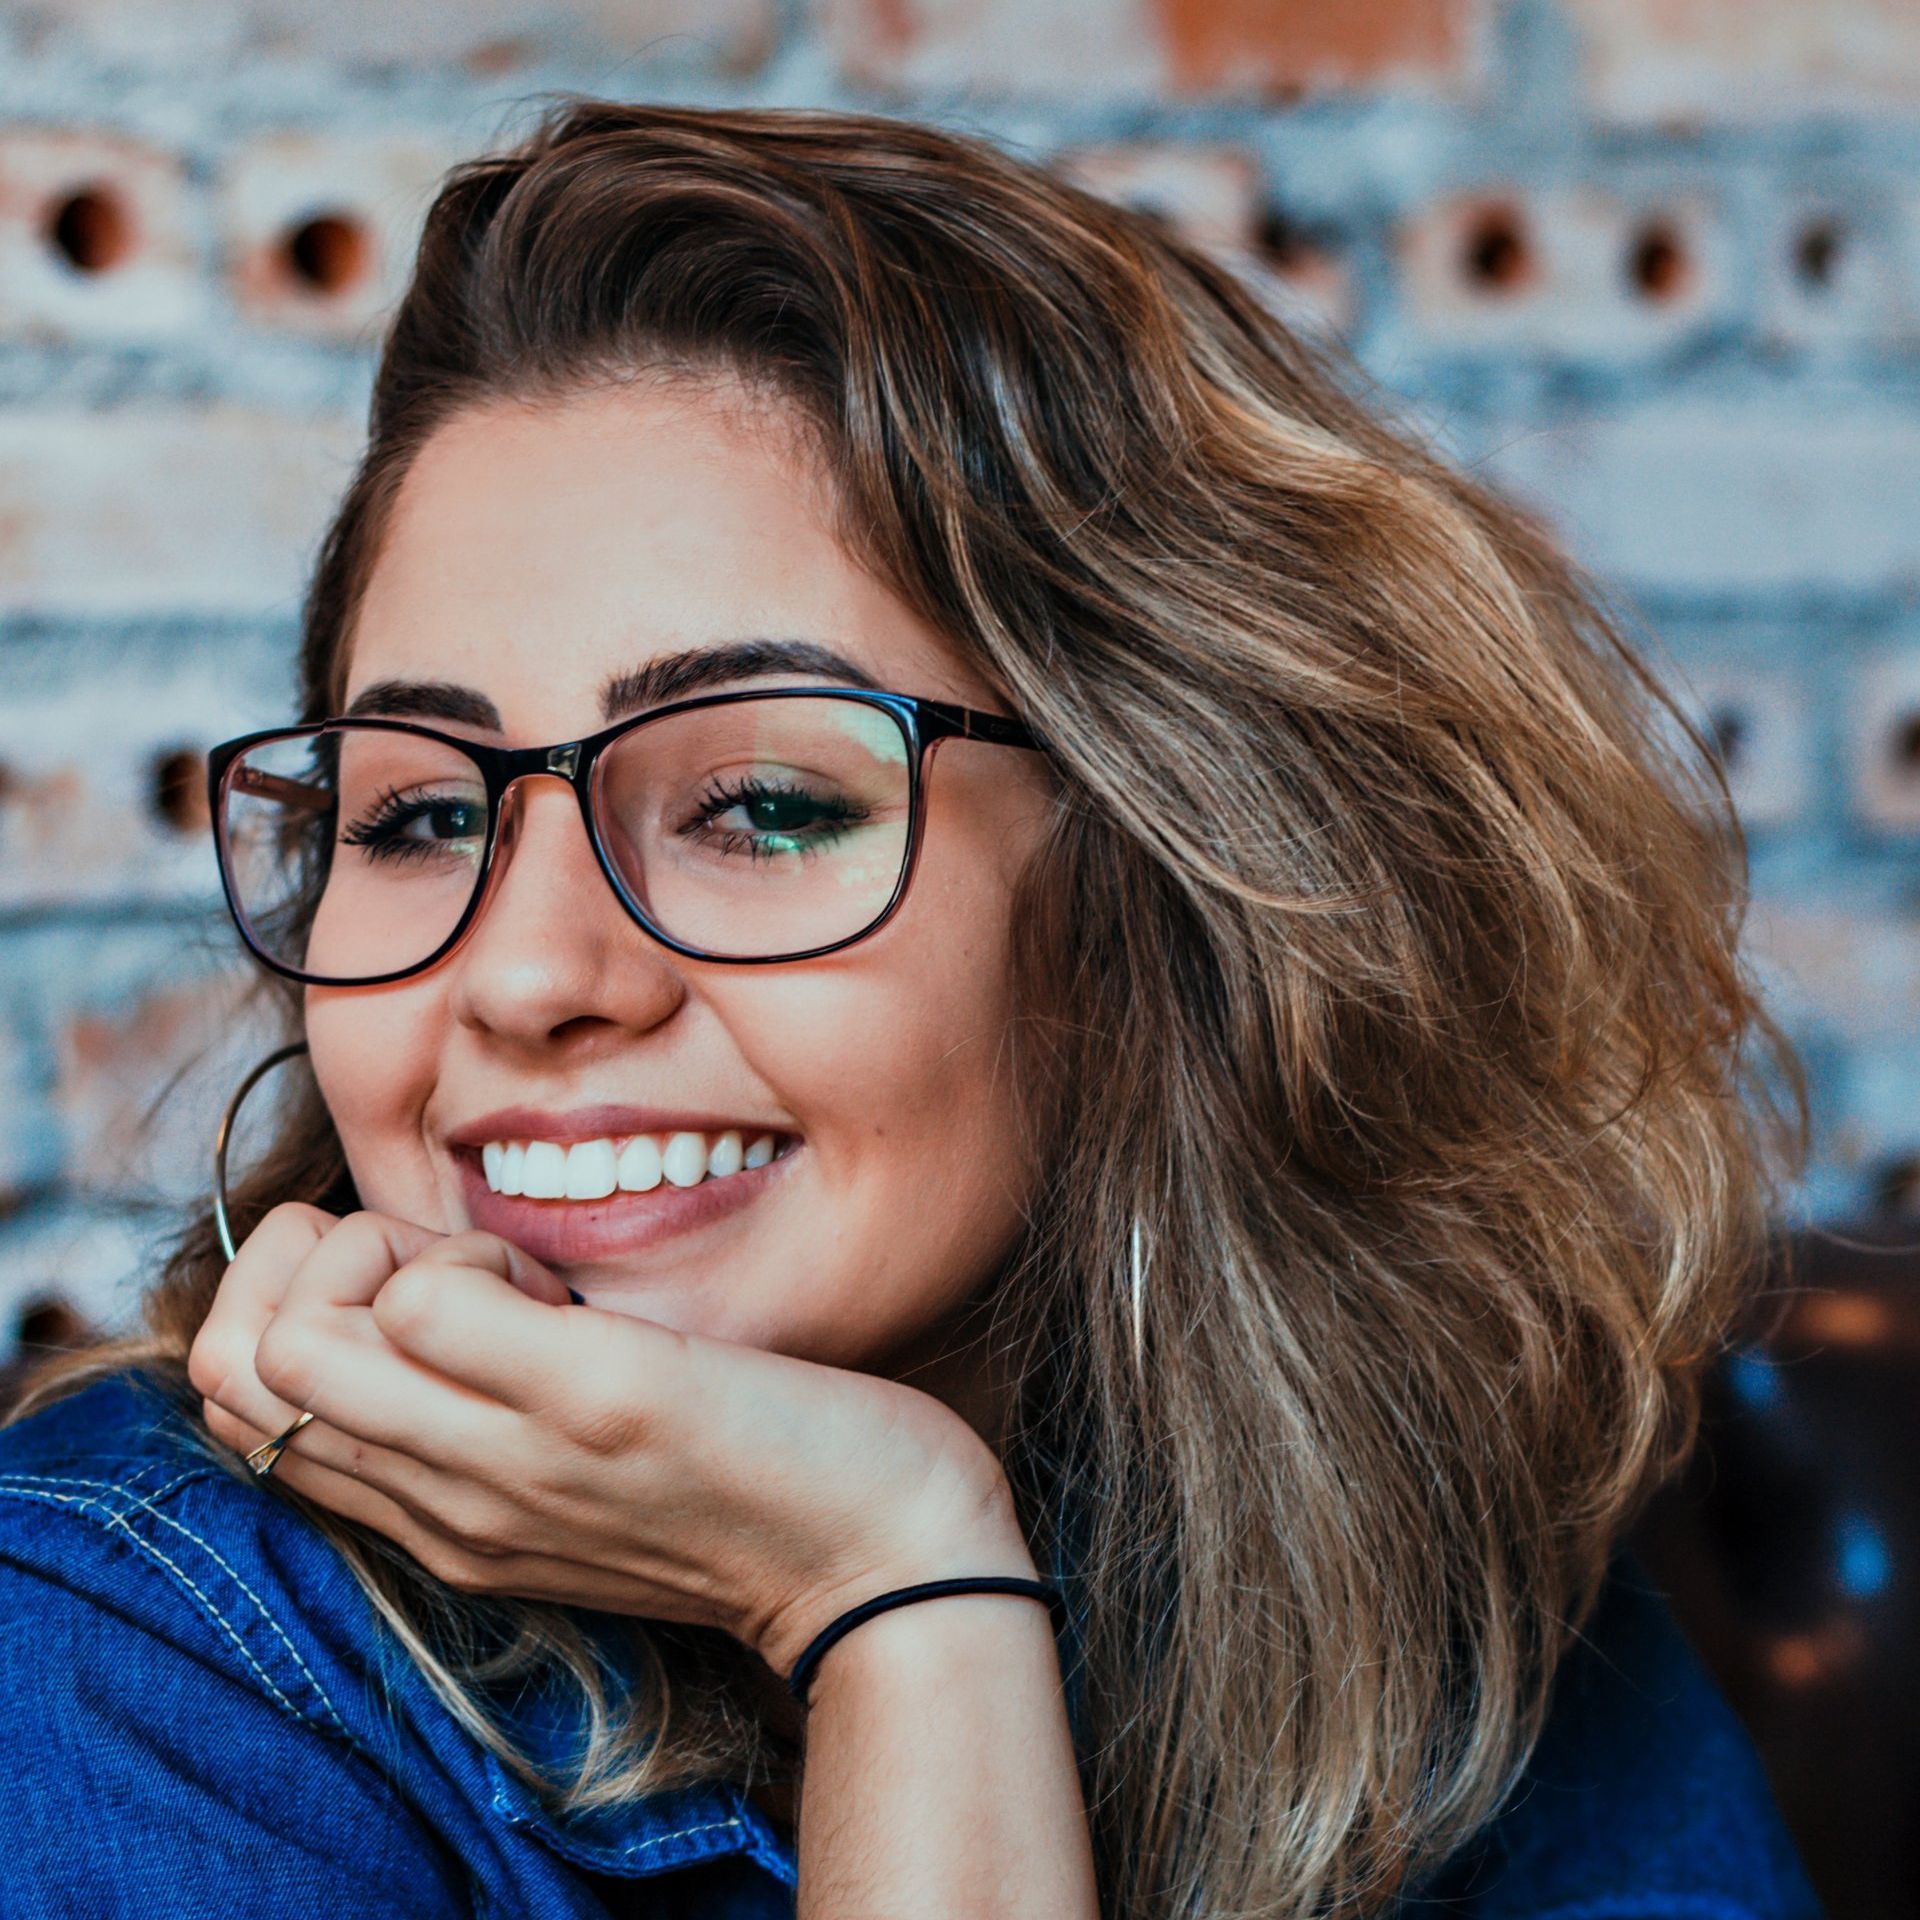 girl smiling, with glasses on